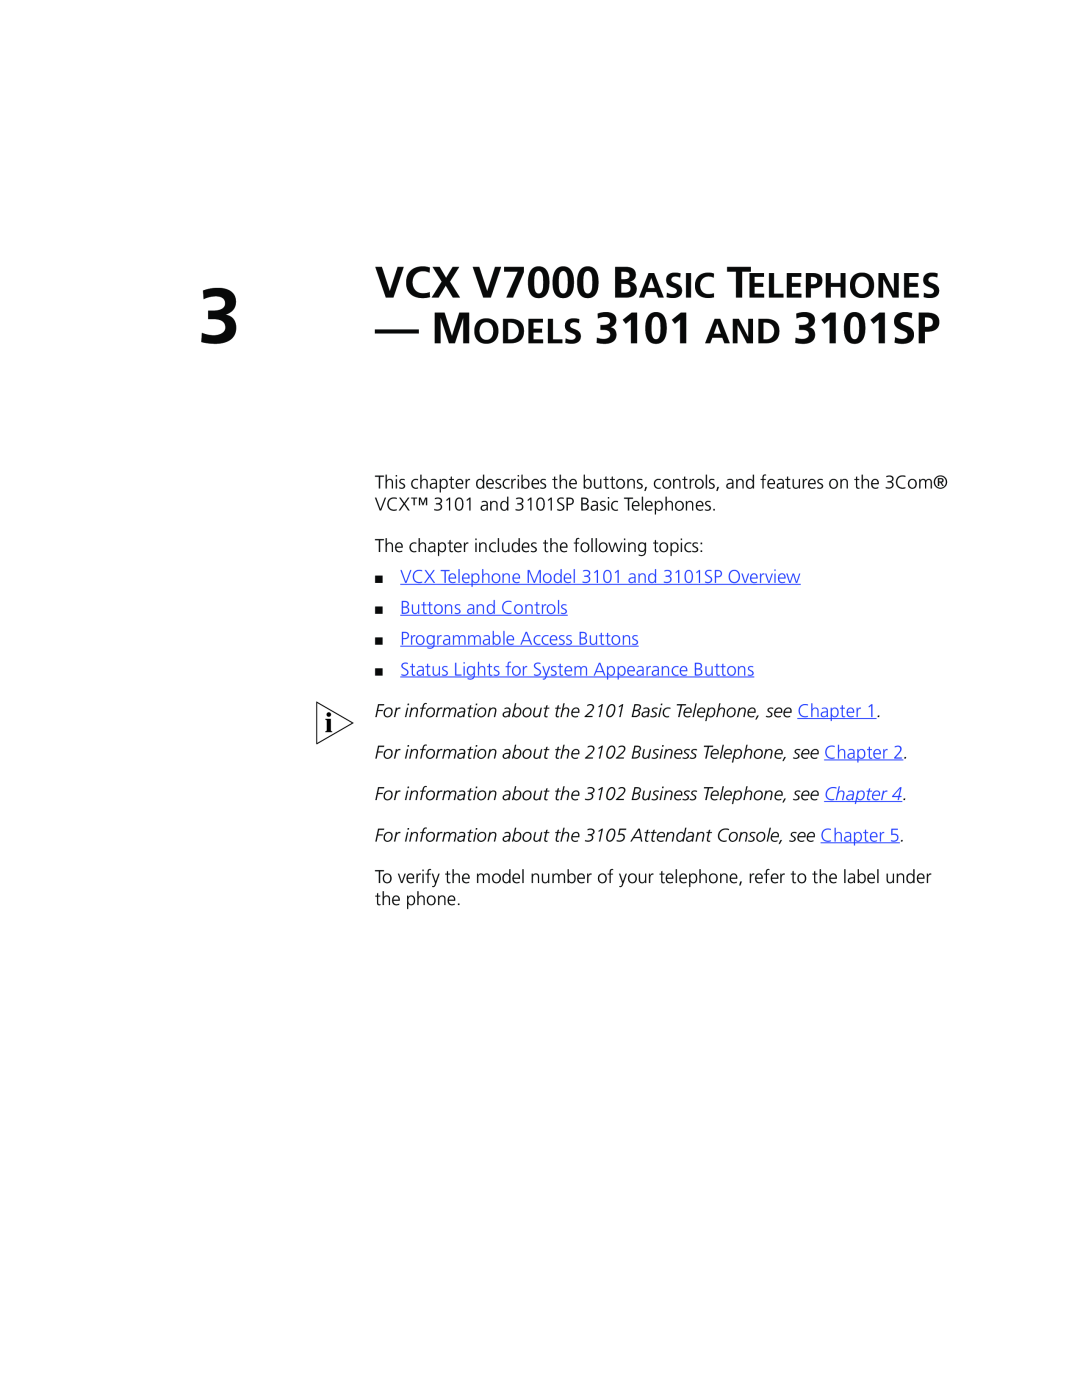 3Com manual MODELS 3101 AND 3101SP, VCX V7000 BASIC TELEPHONES, Programmable Access Buttons 